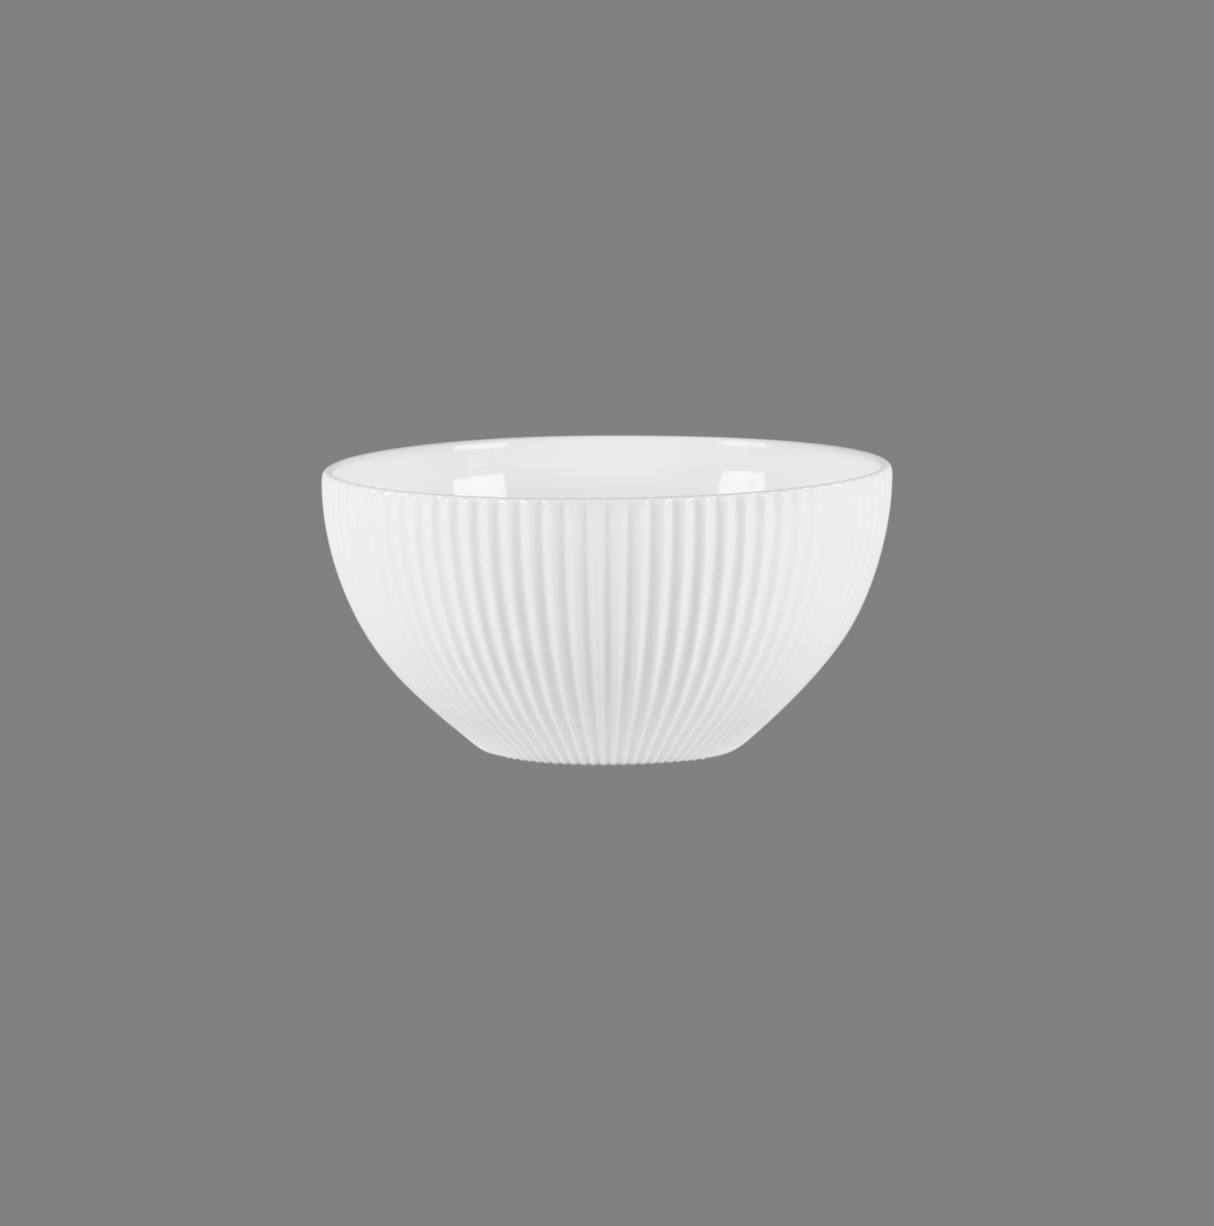 Spectra Round Bowl - 1000ml: Pack of 6